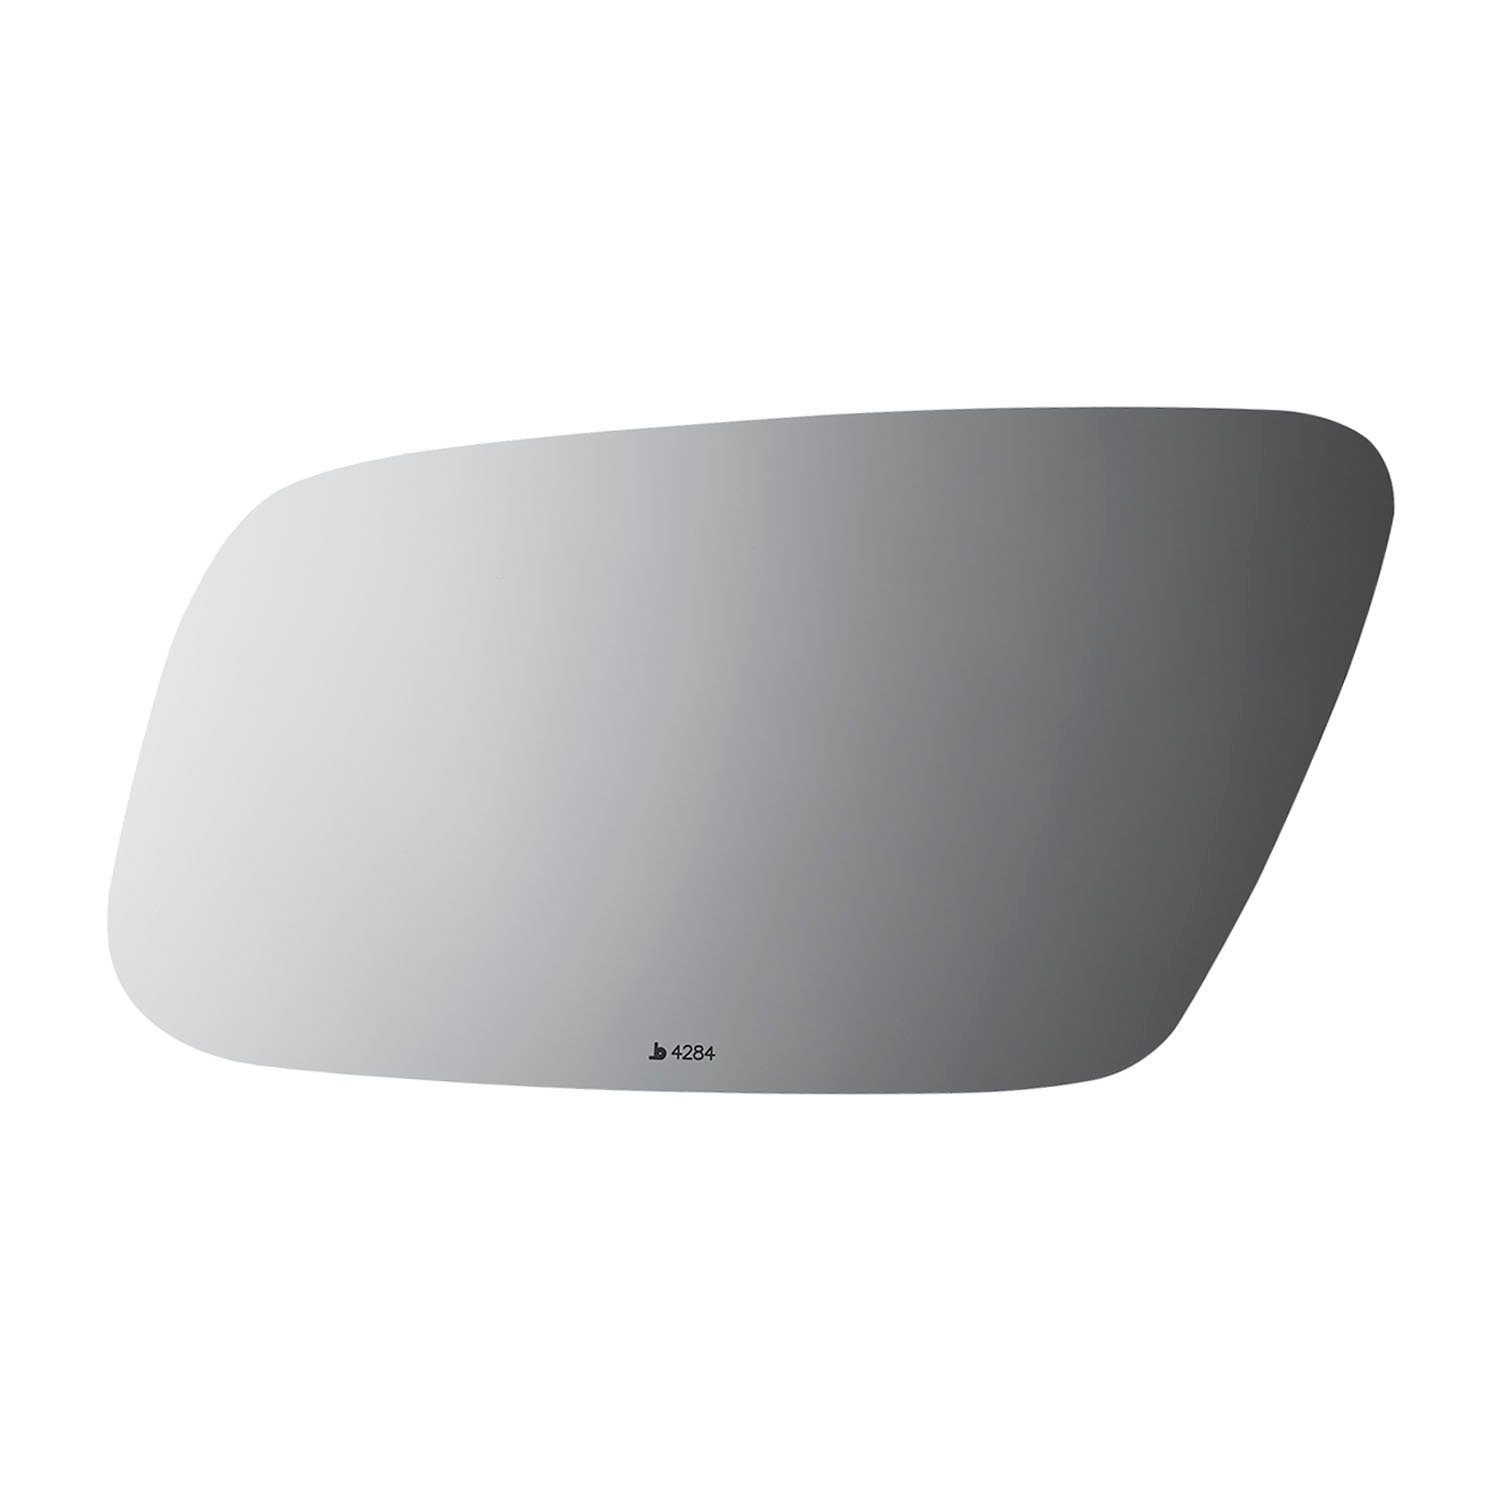 4284 SIDE VIEW MIRROR